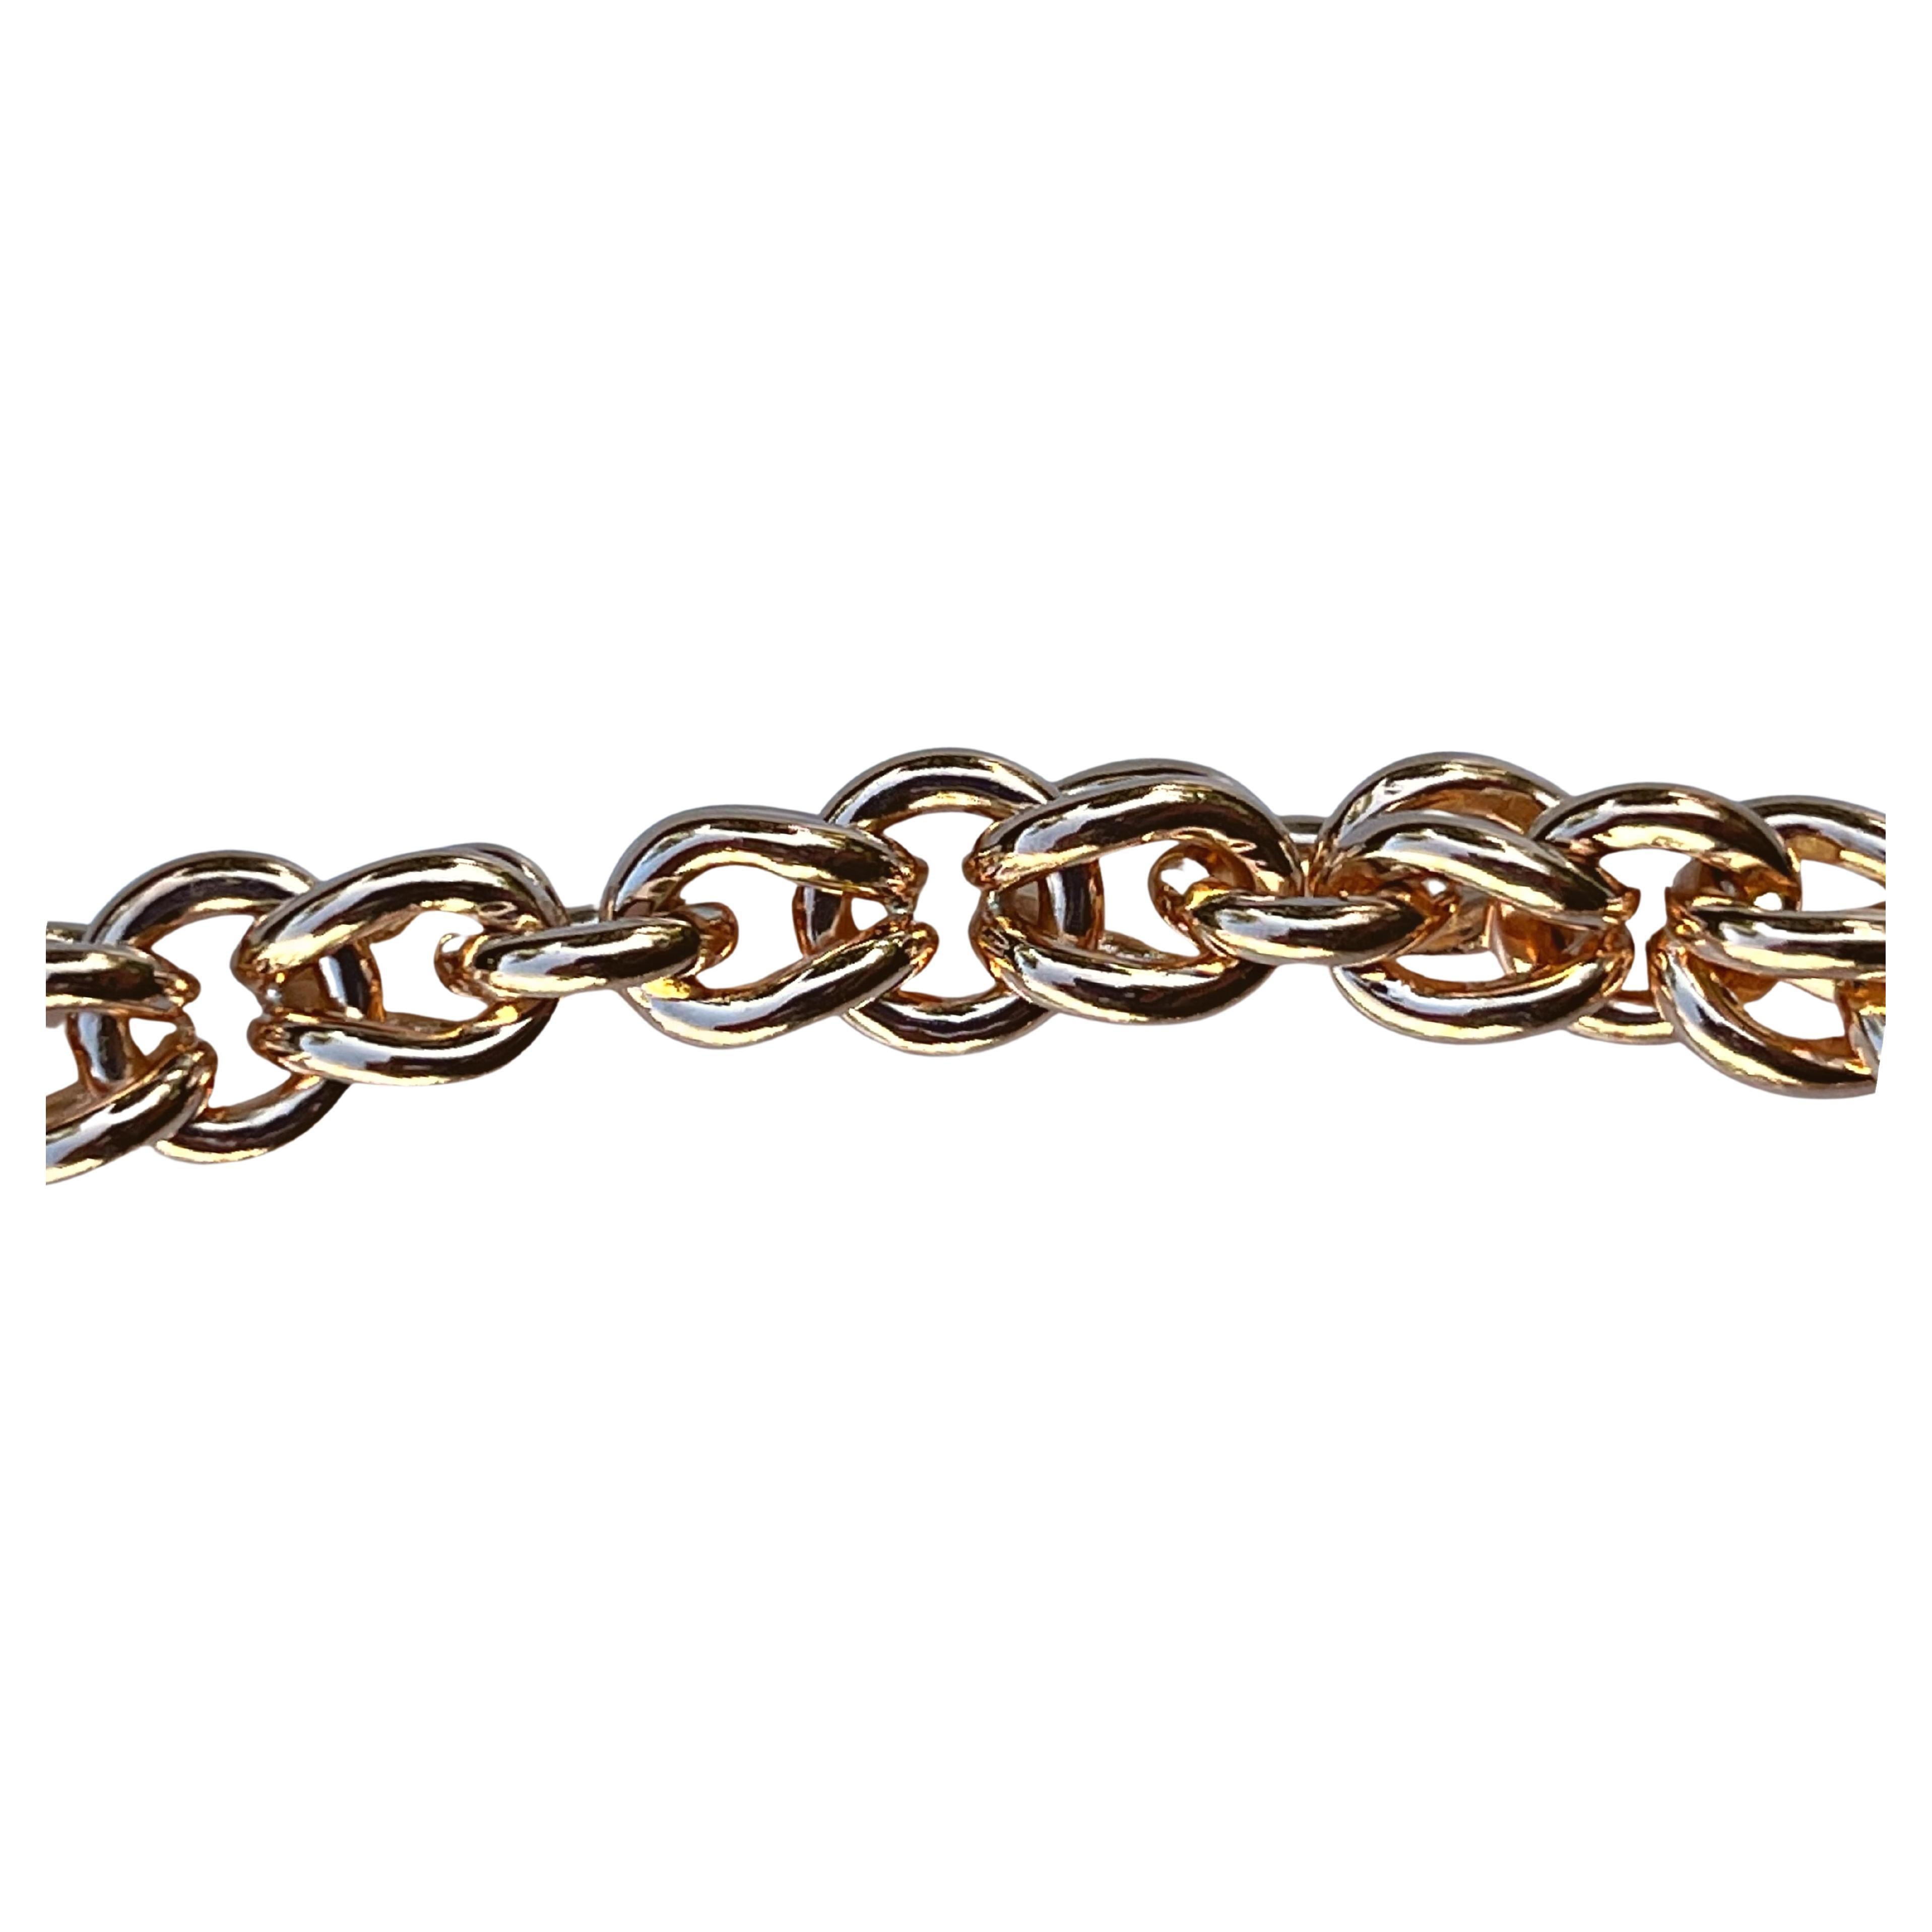 20 karat solid rose gold wheat chain bracelet. This bracelet contains an extra smooth and shiny finish due to its high gold purity. The 20 karat gold makeup makes the piece 83% pure gold. 

This bracelet is the perfect mix of investment and